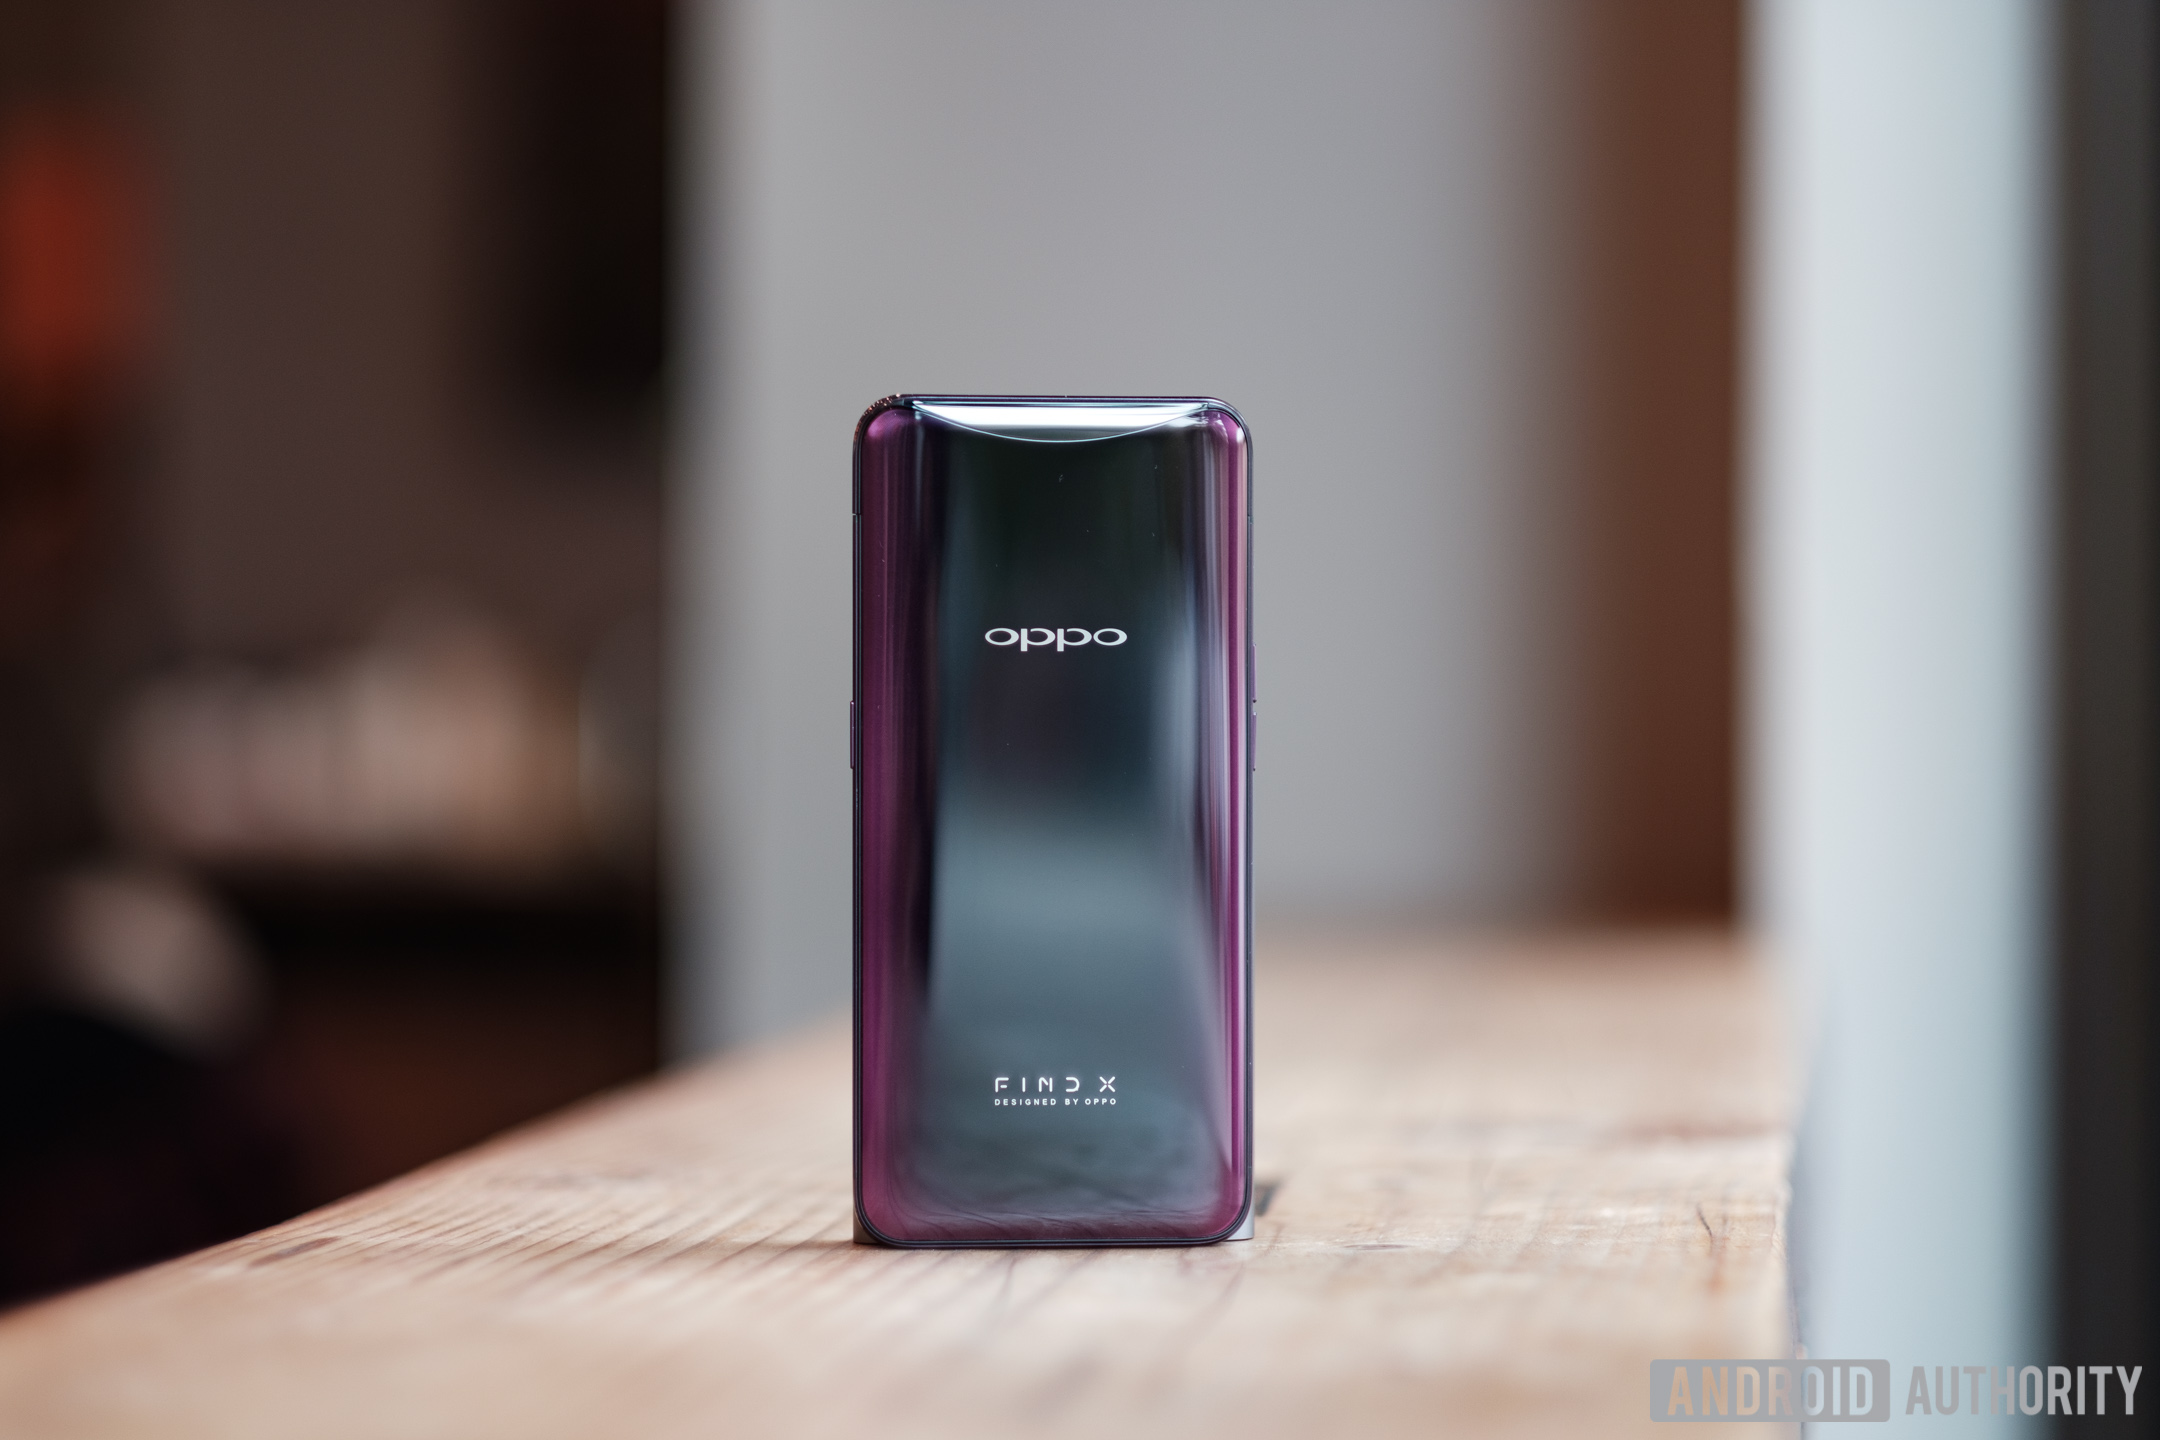 OPPO Find X upright